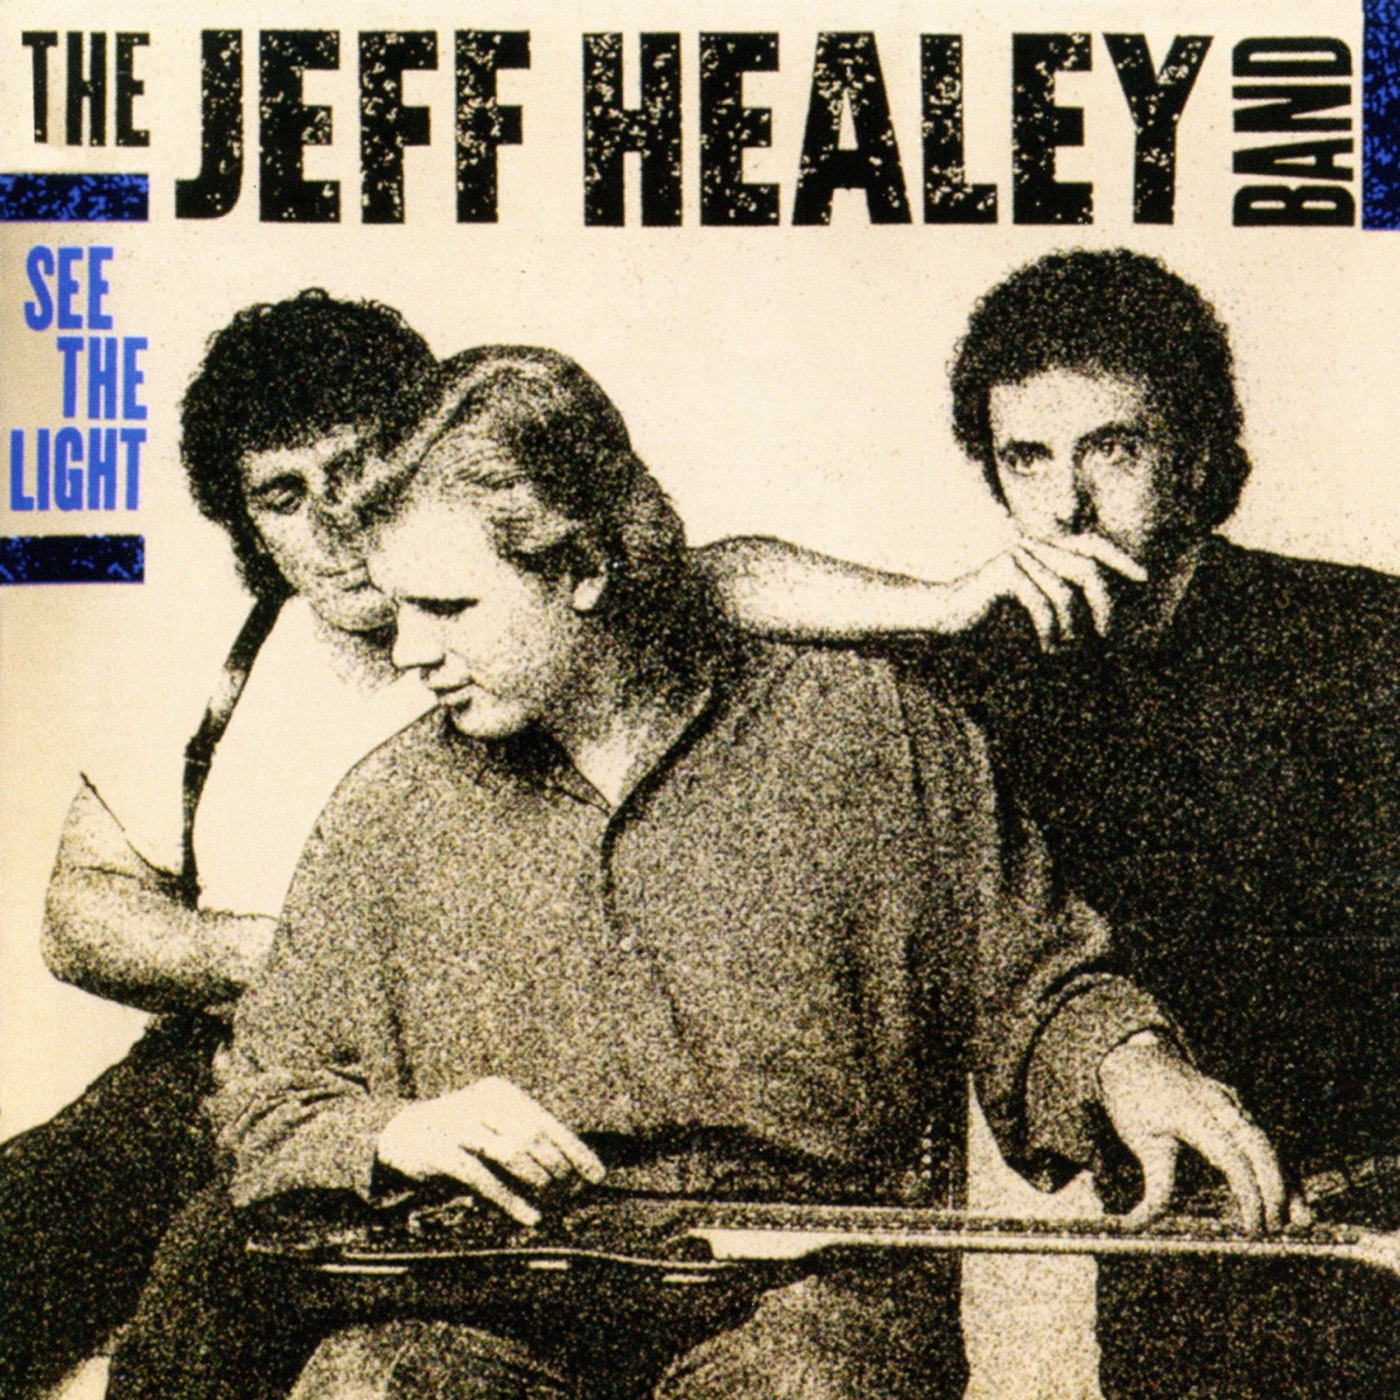 See the Light by The Jeff Healey Band